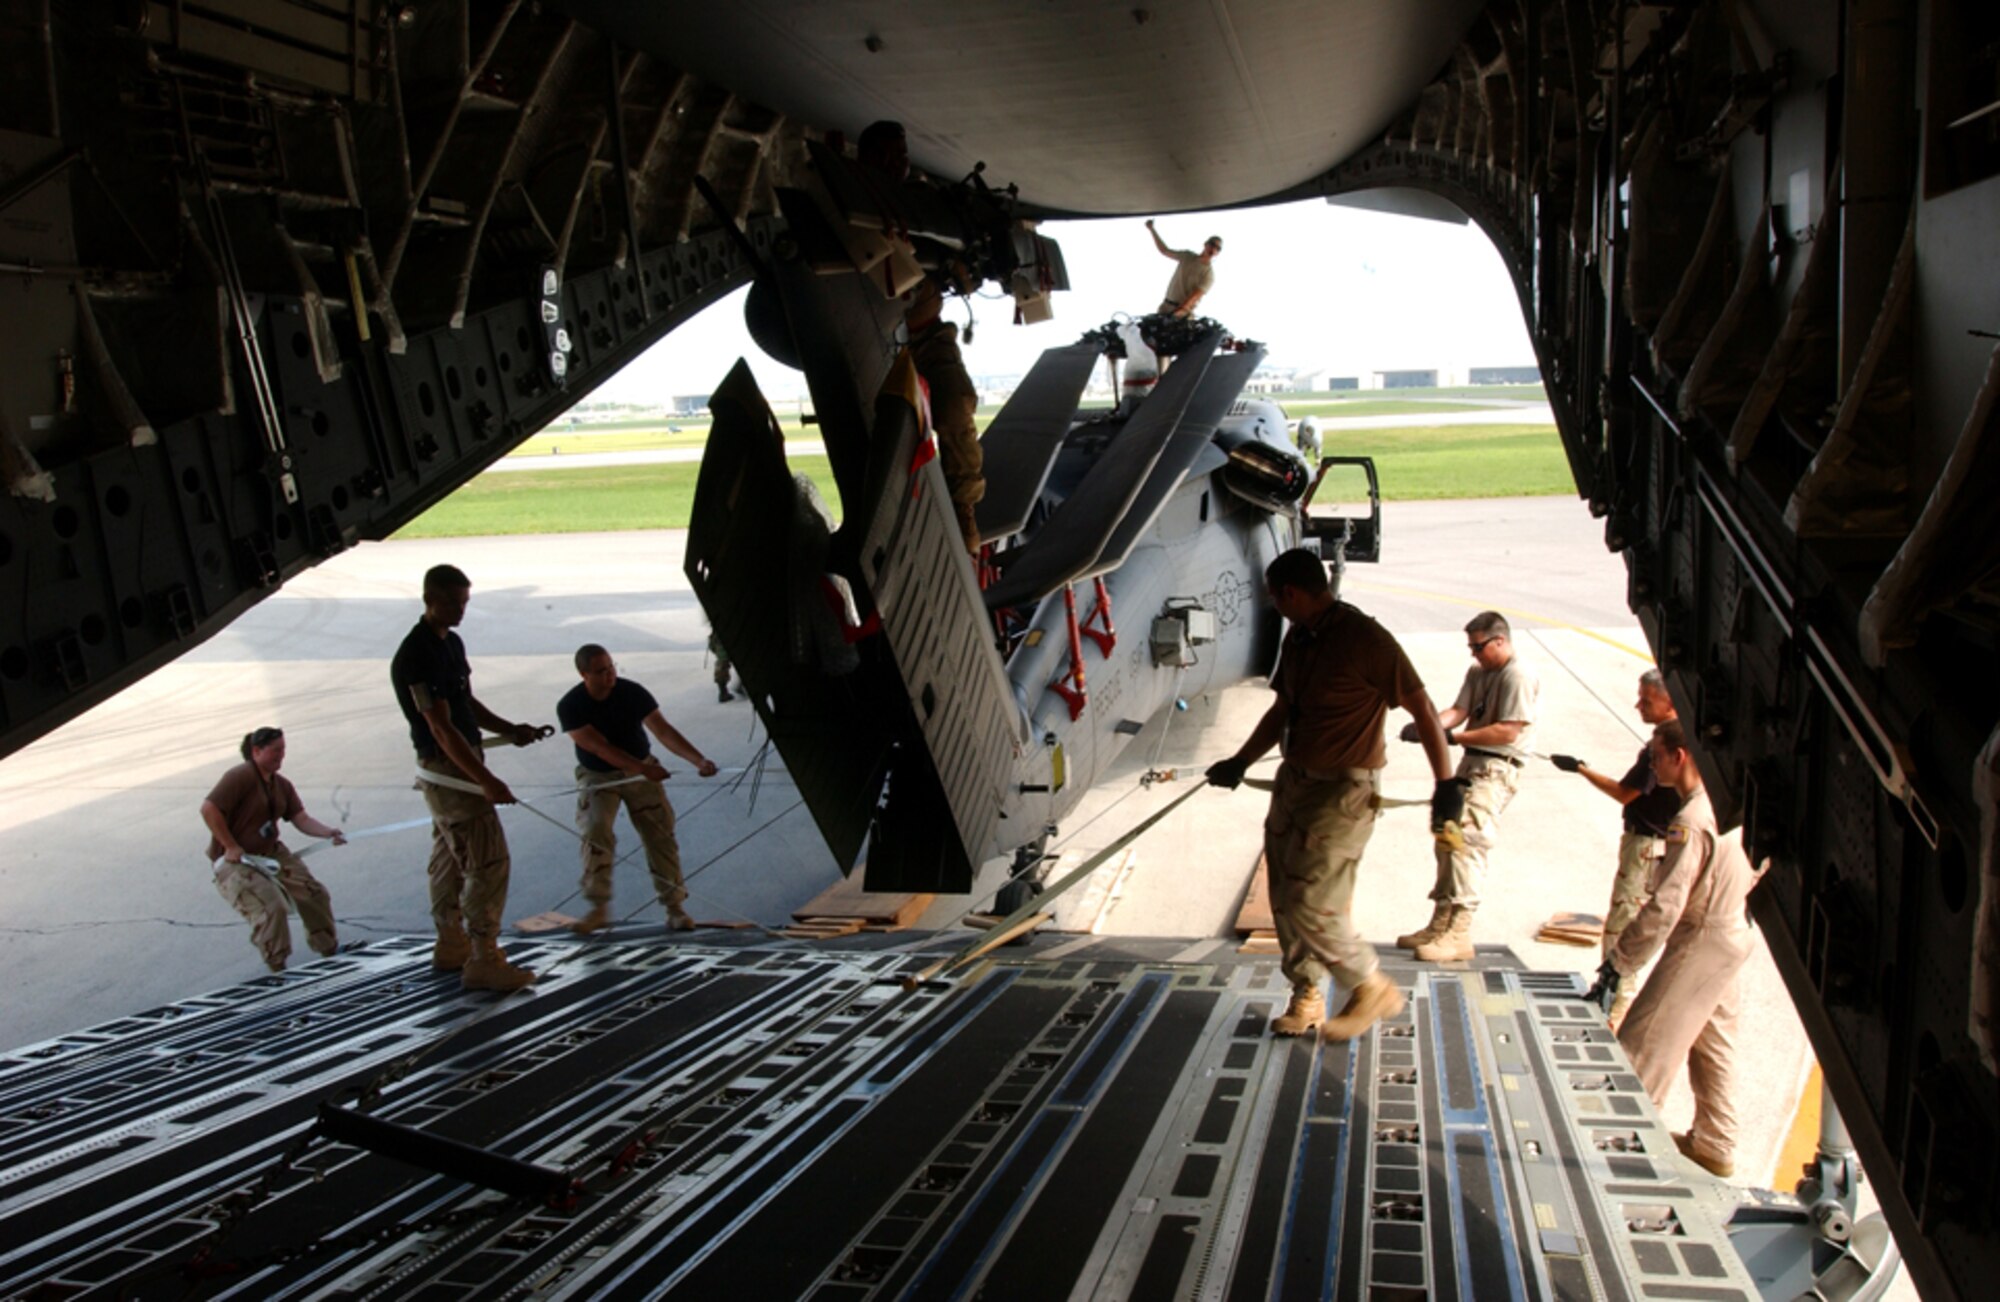 Airmen from the 33rd Rescue Squadron, Kadena Air Base, Japan, push one of two HH-60 Pave Hawk helicopters into a C-17 GlobeMaster July 30 in preparation for deployment to Kandahar, Afghanistan. This is the second time since January the squadron has deployed to Afghanistan. A group of squadron Airmen returned in May from a 4-month deployment to Kandahar, where this second group will conduct combat search and rescue and medical rescue missions in support of Operation Enduring Freedom. (U.S. Air Force photo/Staff Sgt. Reynaldo Ramon)

